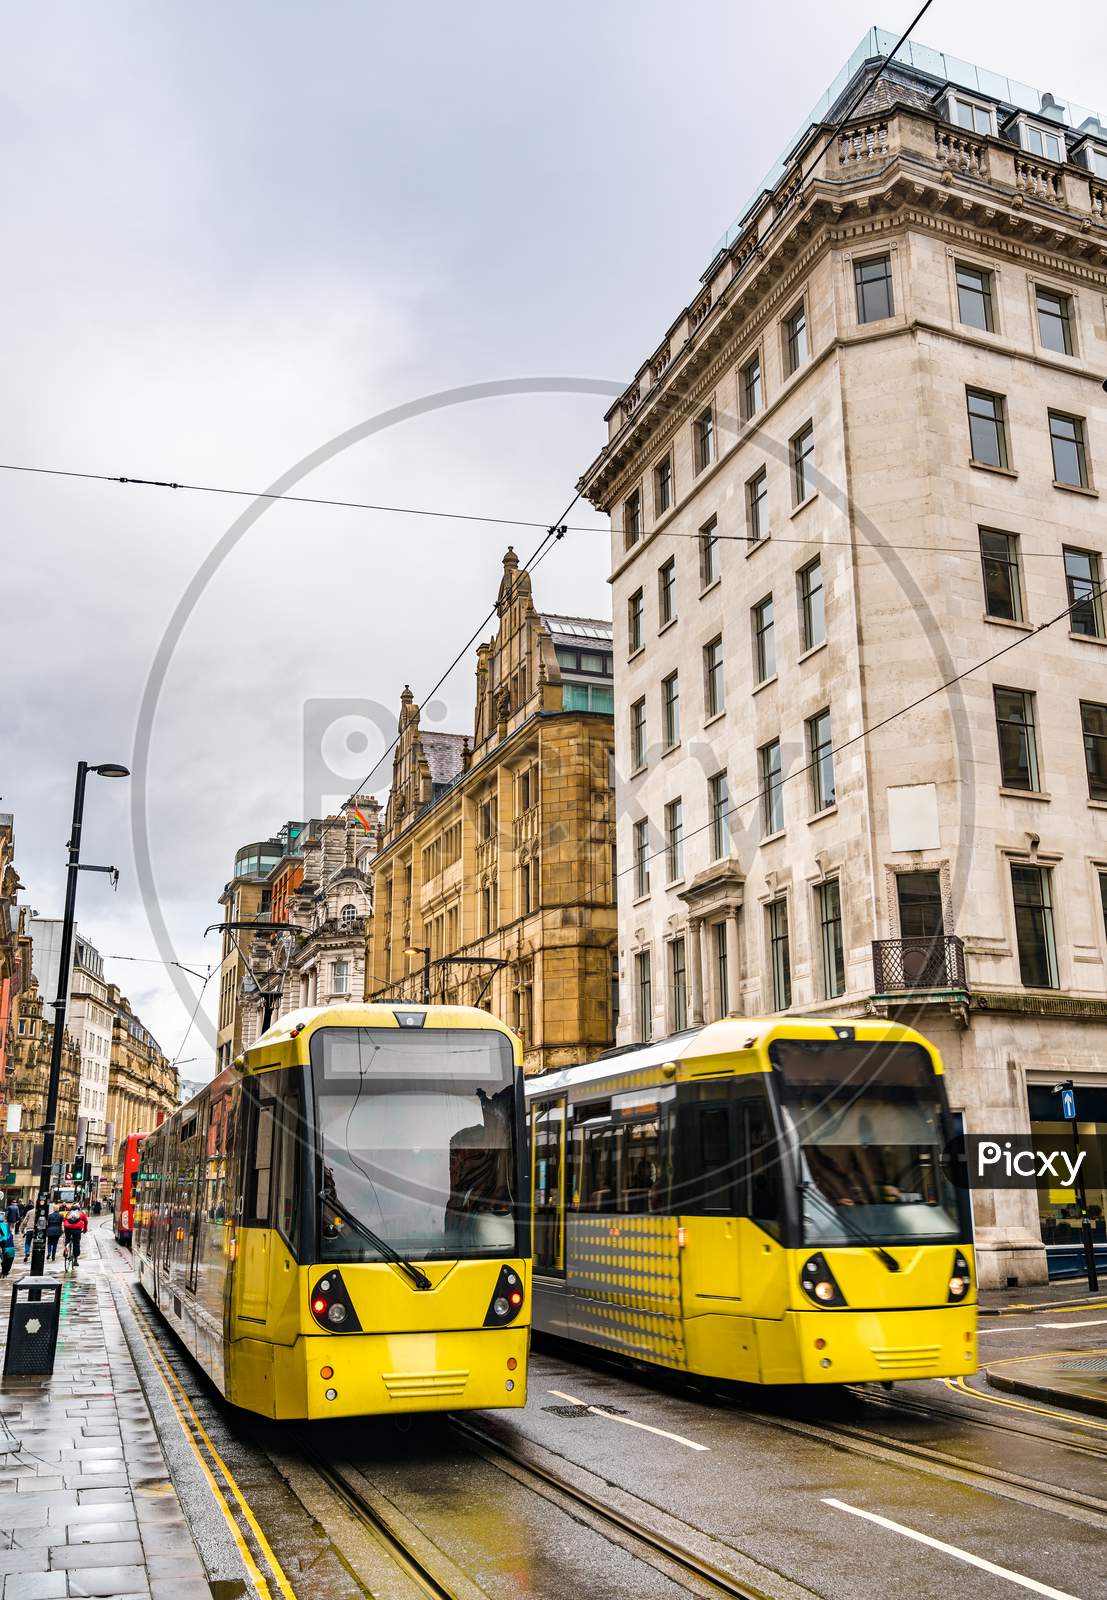 City Tram In The Centre Of Manchester, England